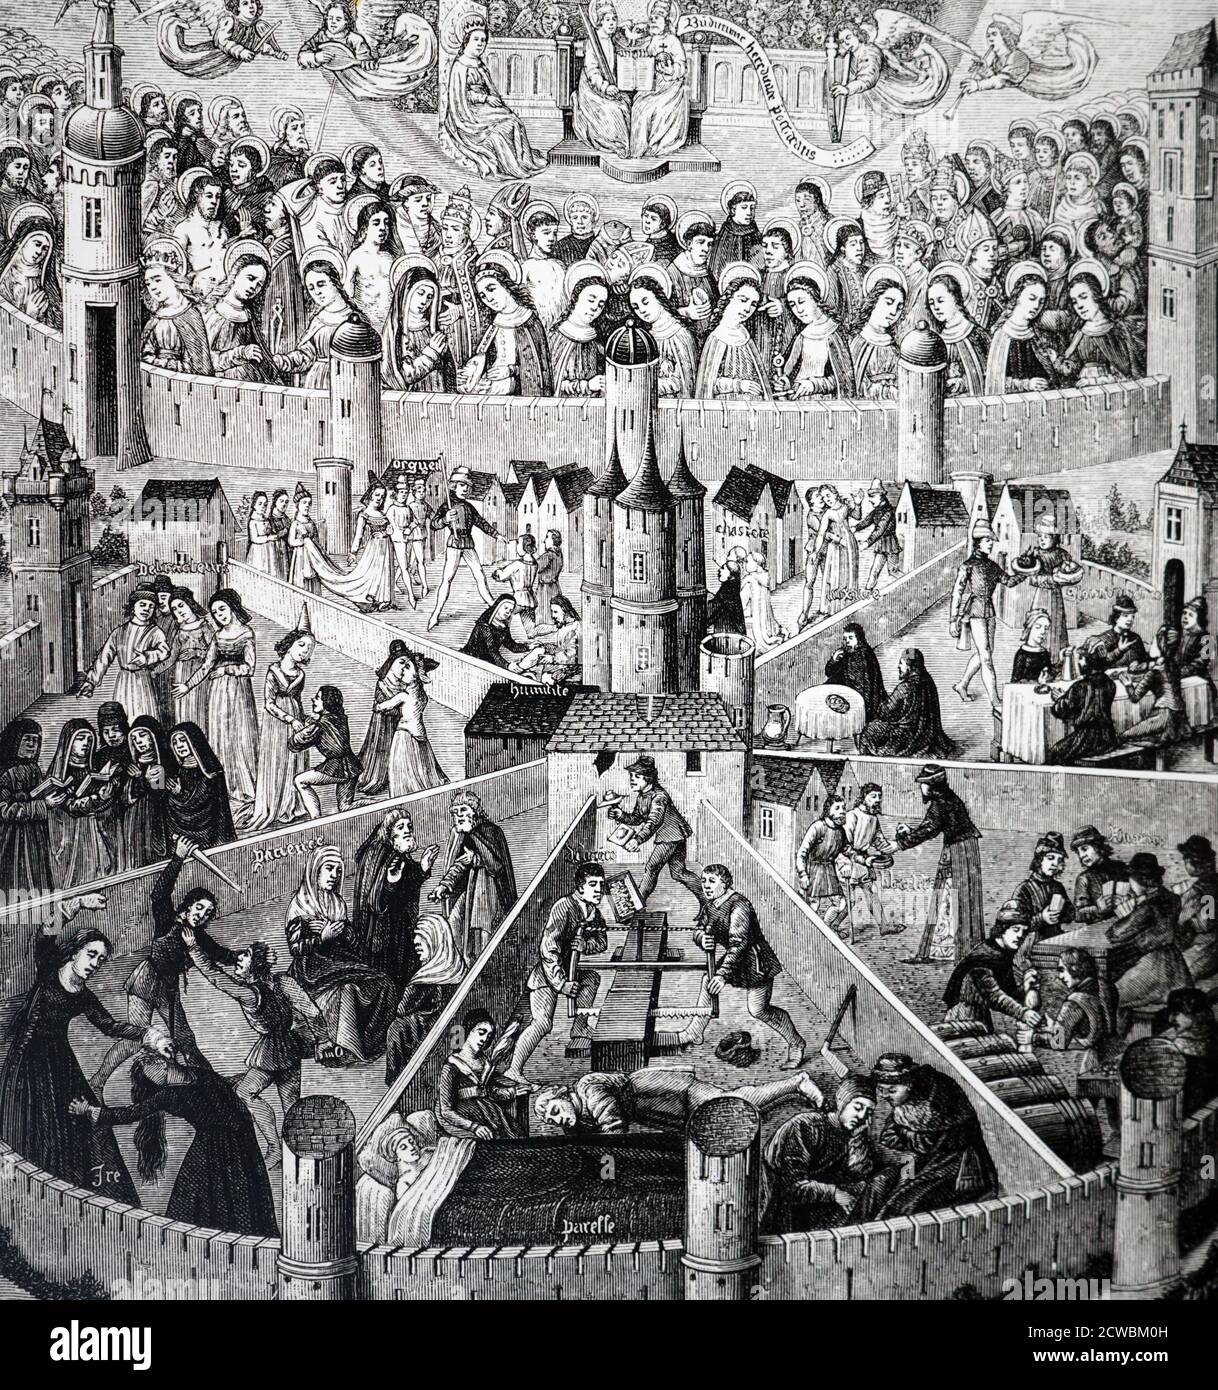 Engraving depicting the City of God as imagined by St. Augustine. At the top are the saints who have already been received into heaven. In the seven compartments below are those who are preparing themselves for heaven by exercising the Christian virtues, or who will be excluded for committing the Seven Deadly Sins. Engraving after a miniature in the 15th-century manuscript translation by Raoul de Presles. Stock Photo